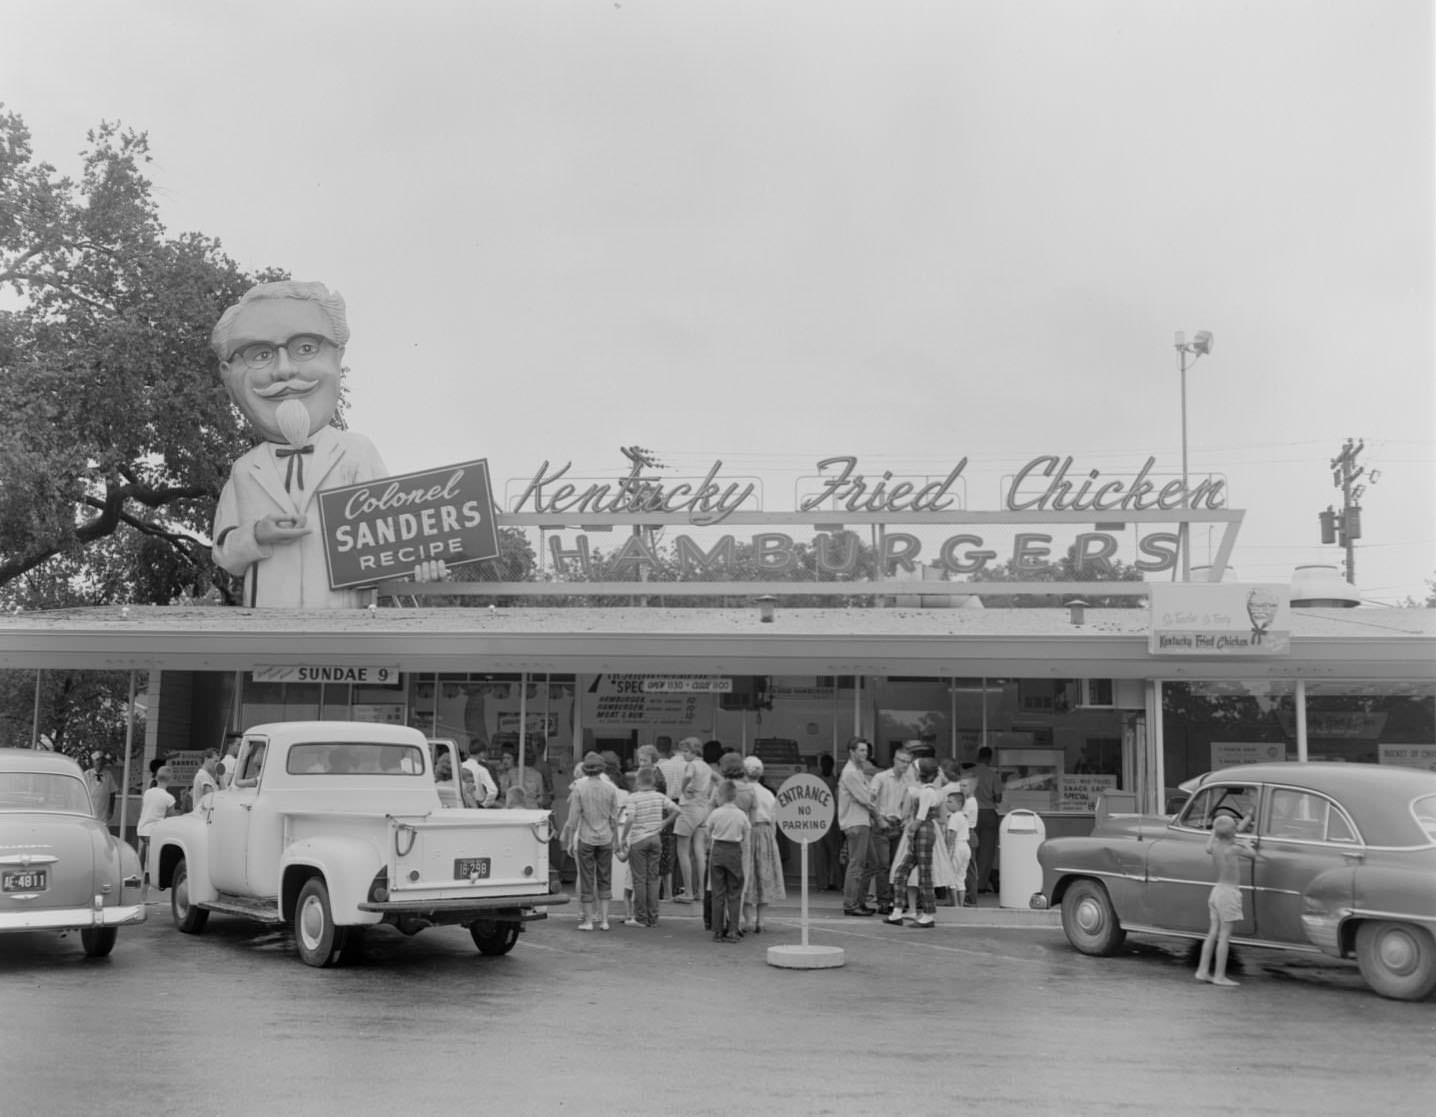 Customers and parked cars in front of Kentucky Fried Chicken stand, Austin, 1960